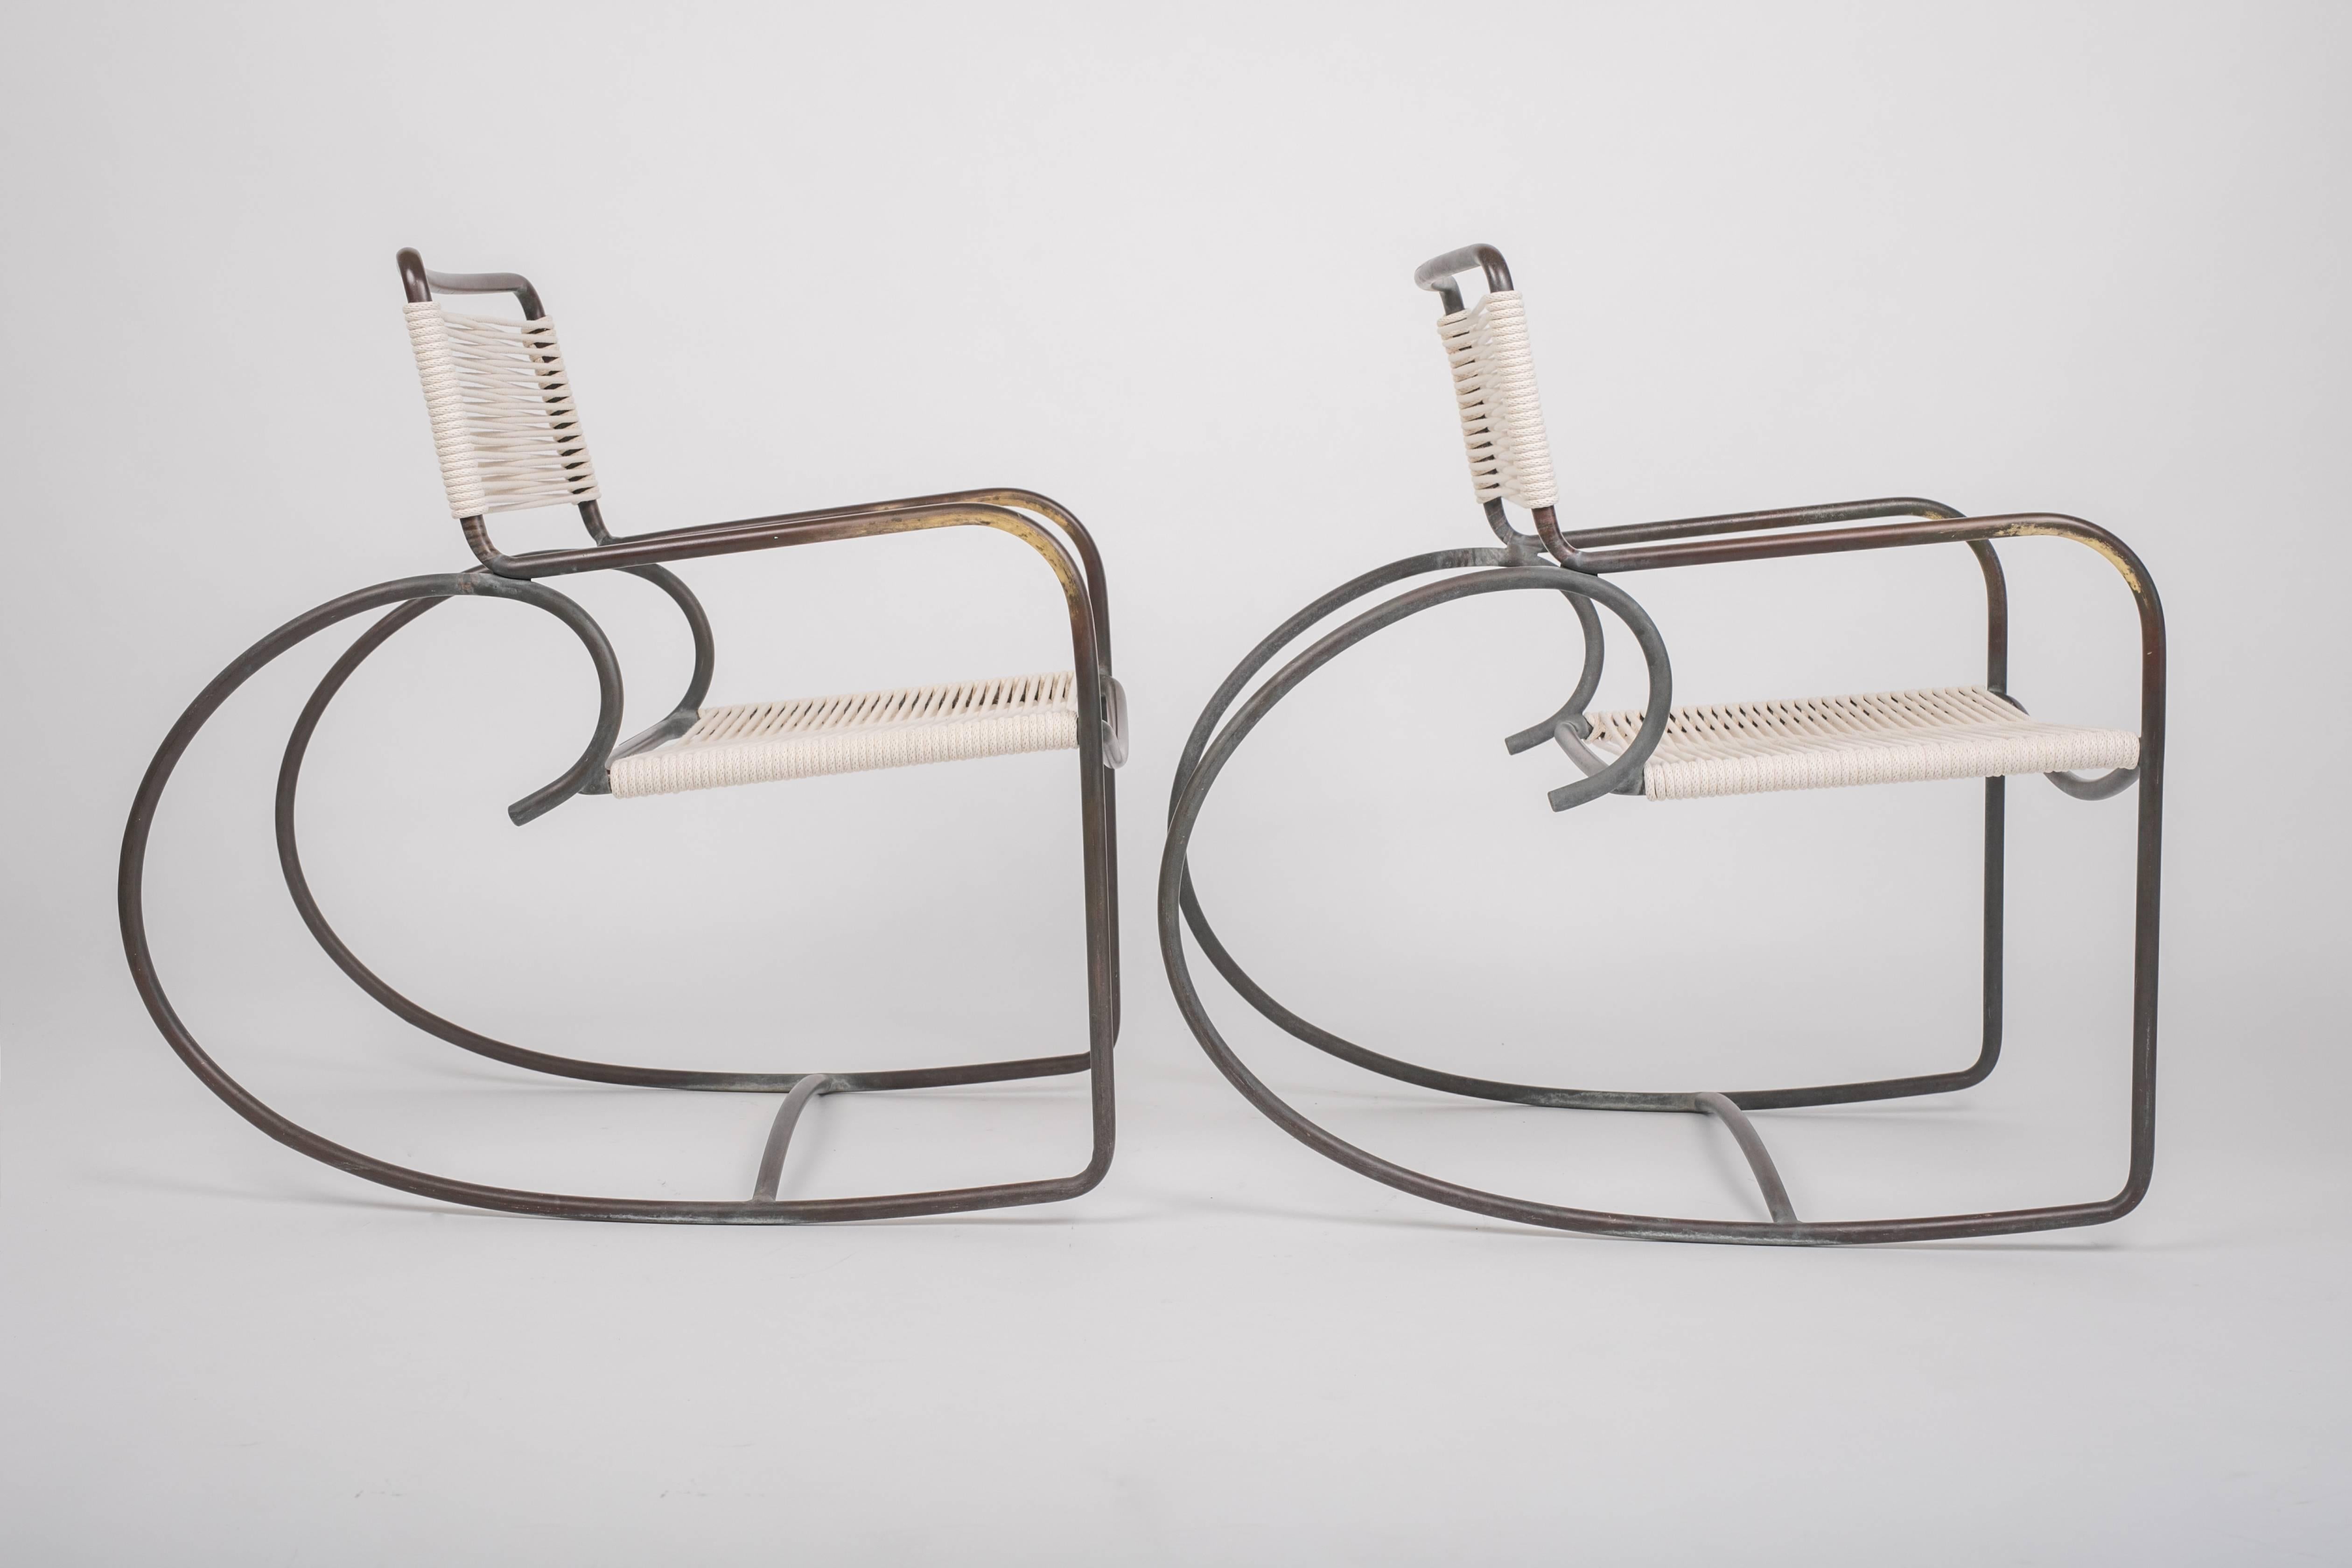 A pair of bronze rocking chairs designed by Walter Lamb and produced by Brown Jordan. The chairs have a sculptural shape, with a single formation of tubular bronze forms the backrest, arms, and exaggerated round runners. The back and seat are strung